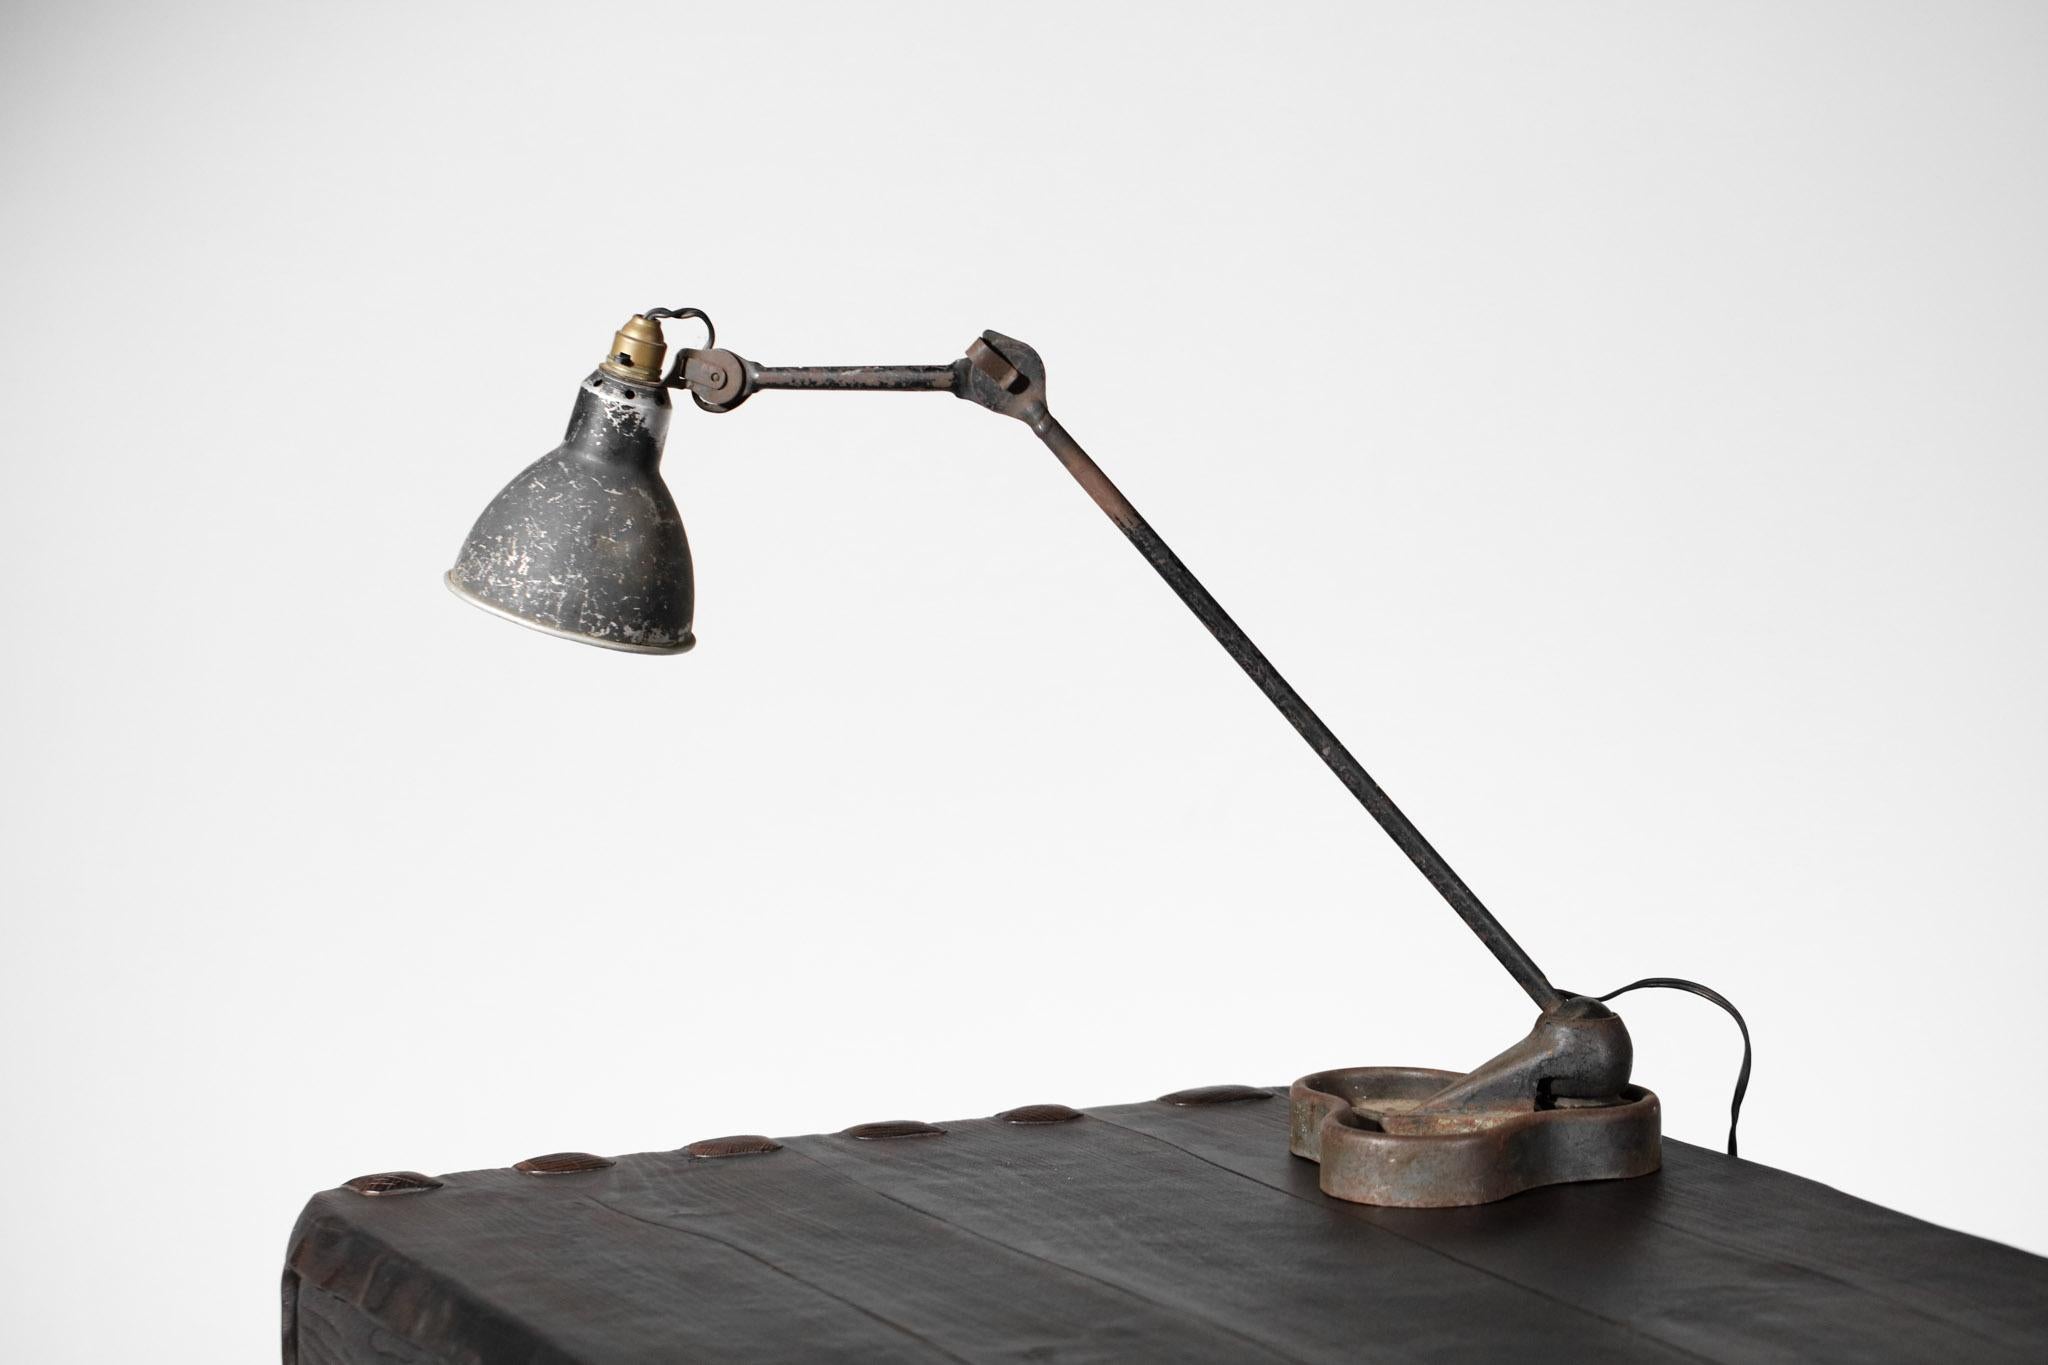 Desk lamp by French designer Bernard Albin Gras from the 1950s.
Steel structure mounted on a cast iron base and perforated steel shade. Nice patina (cf photos).
Industrial style lamp that can be found in many of Le Corbusier's projects.